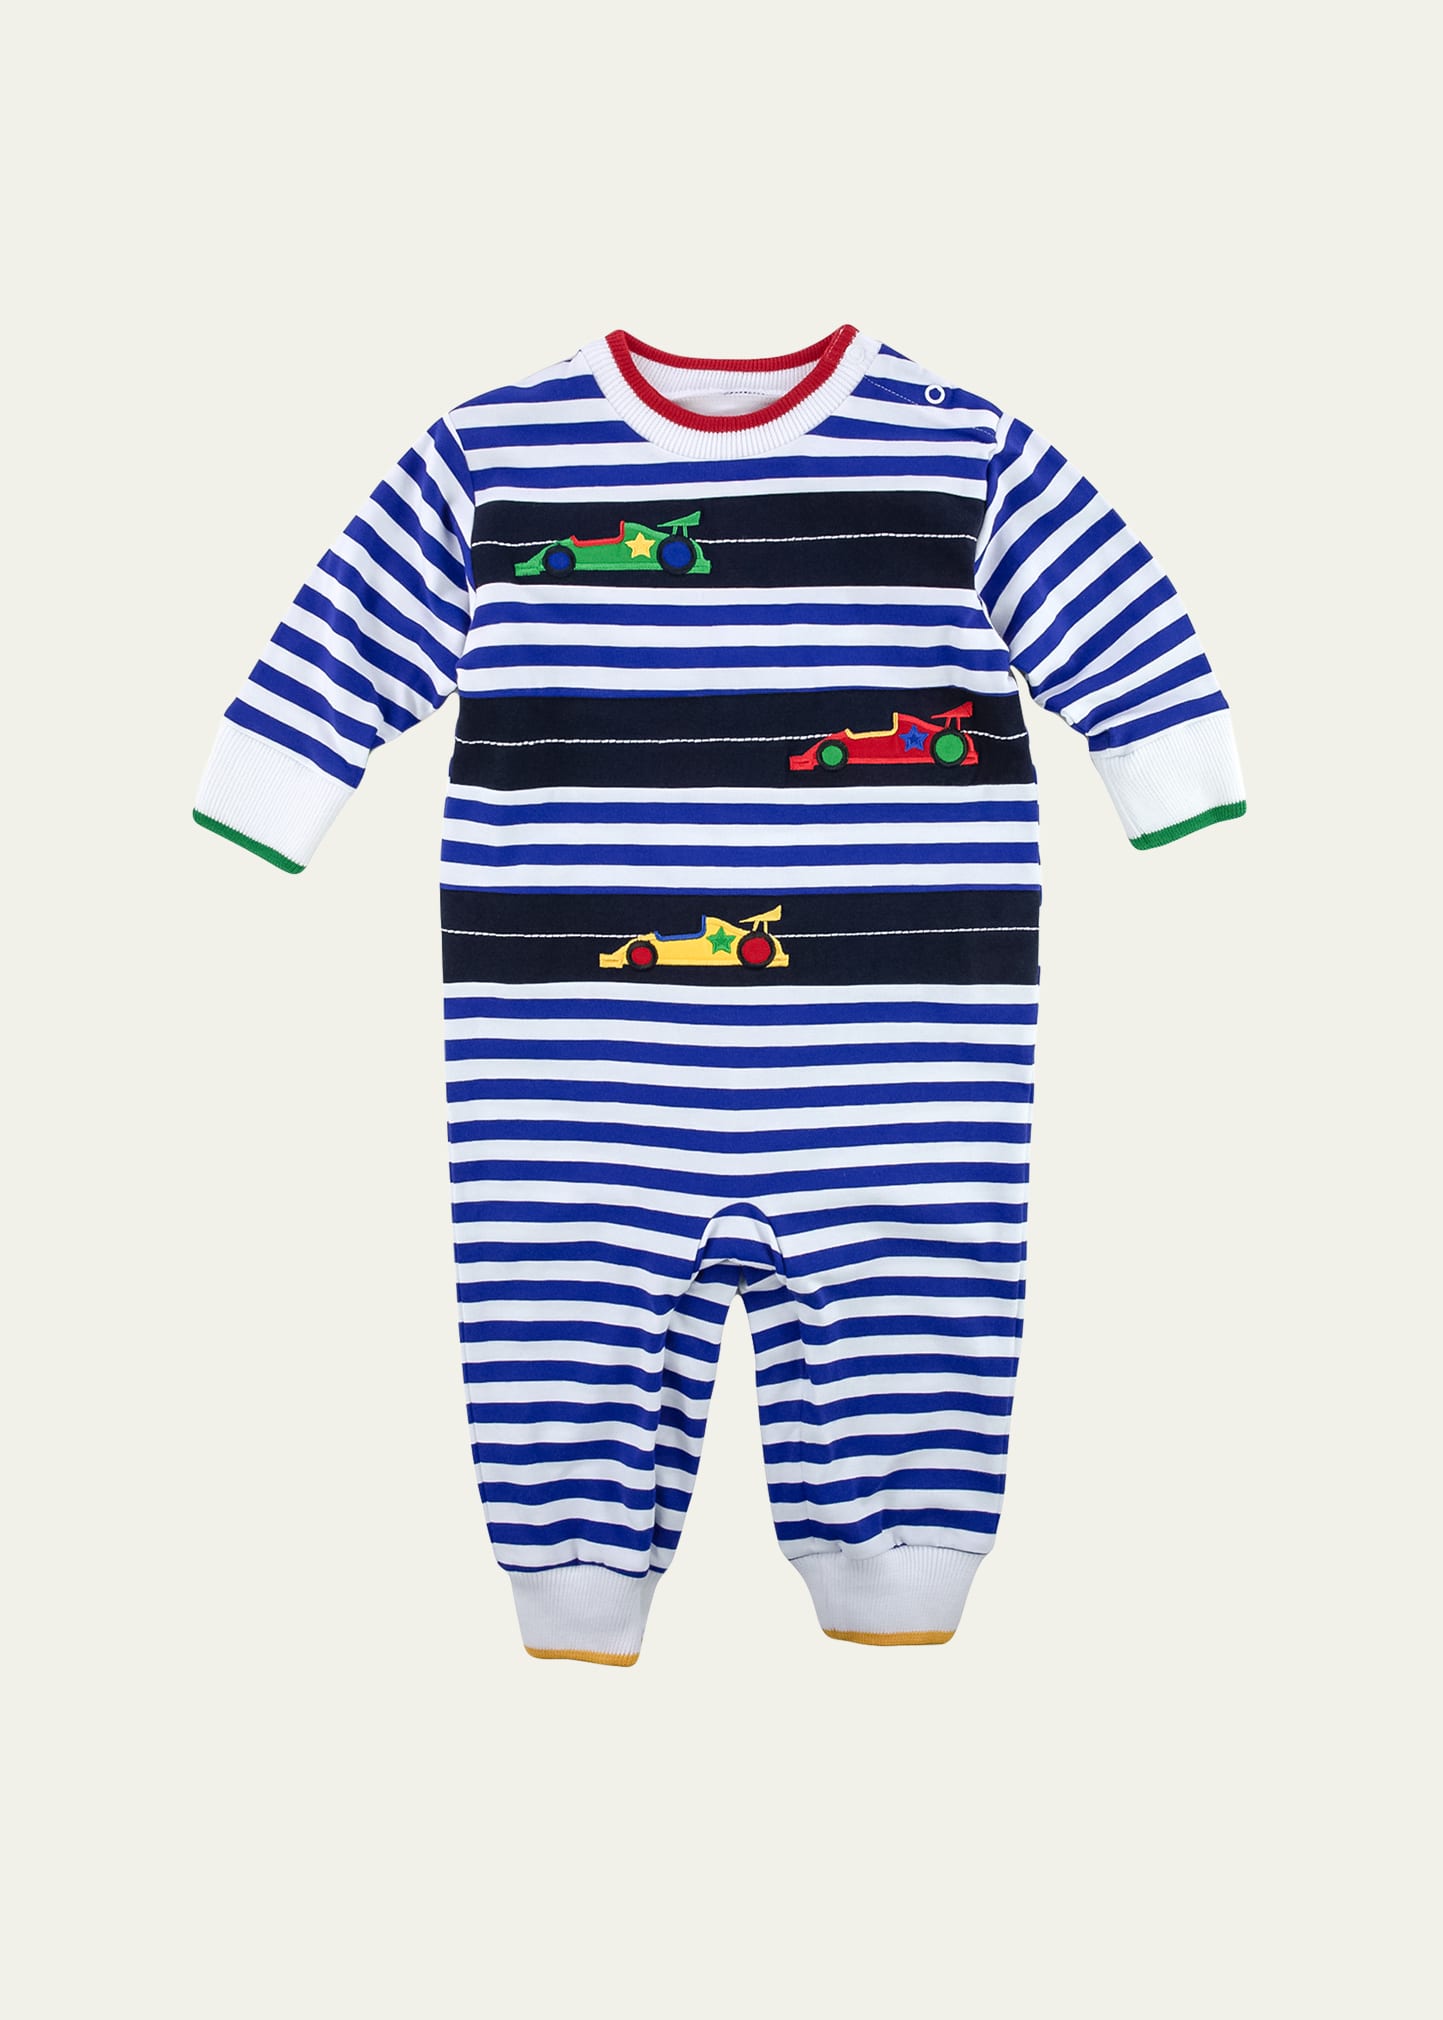 Girl's Striped Knit Coverall W/ Race Cars, Size 3M-18M